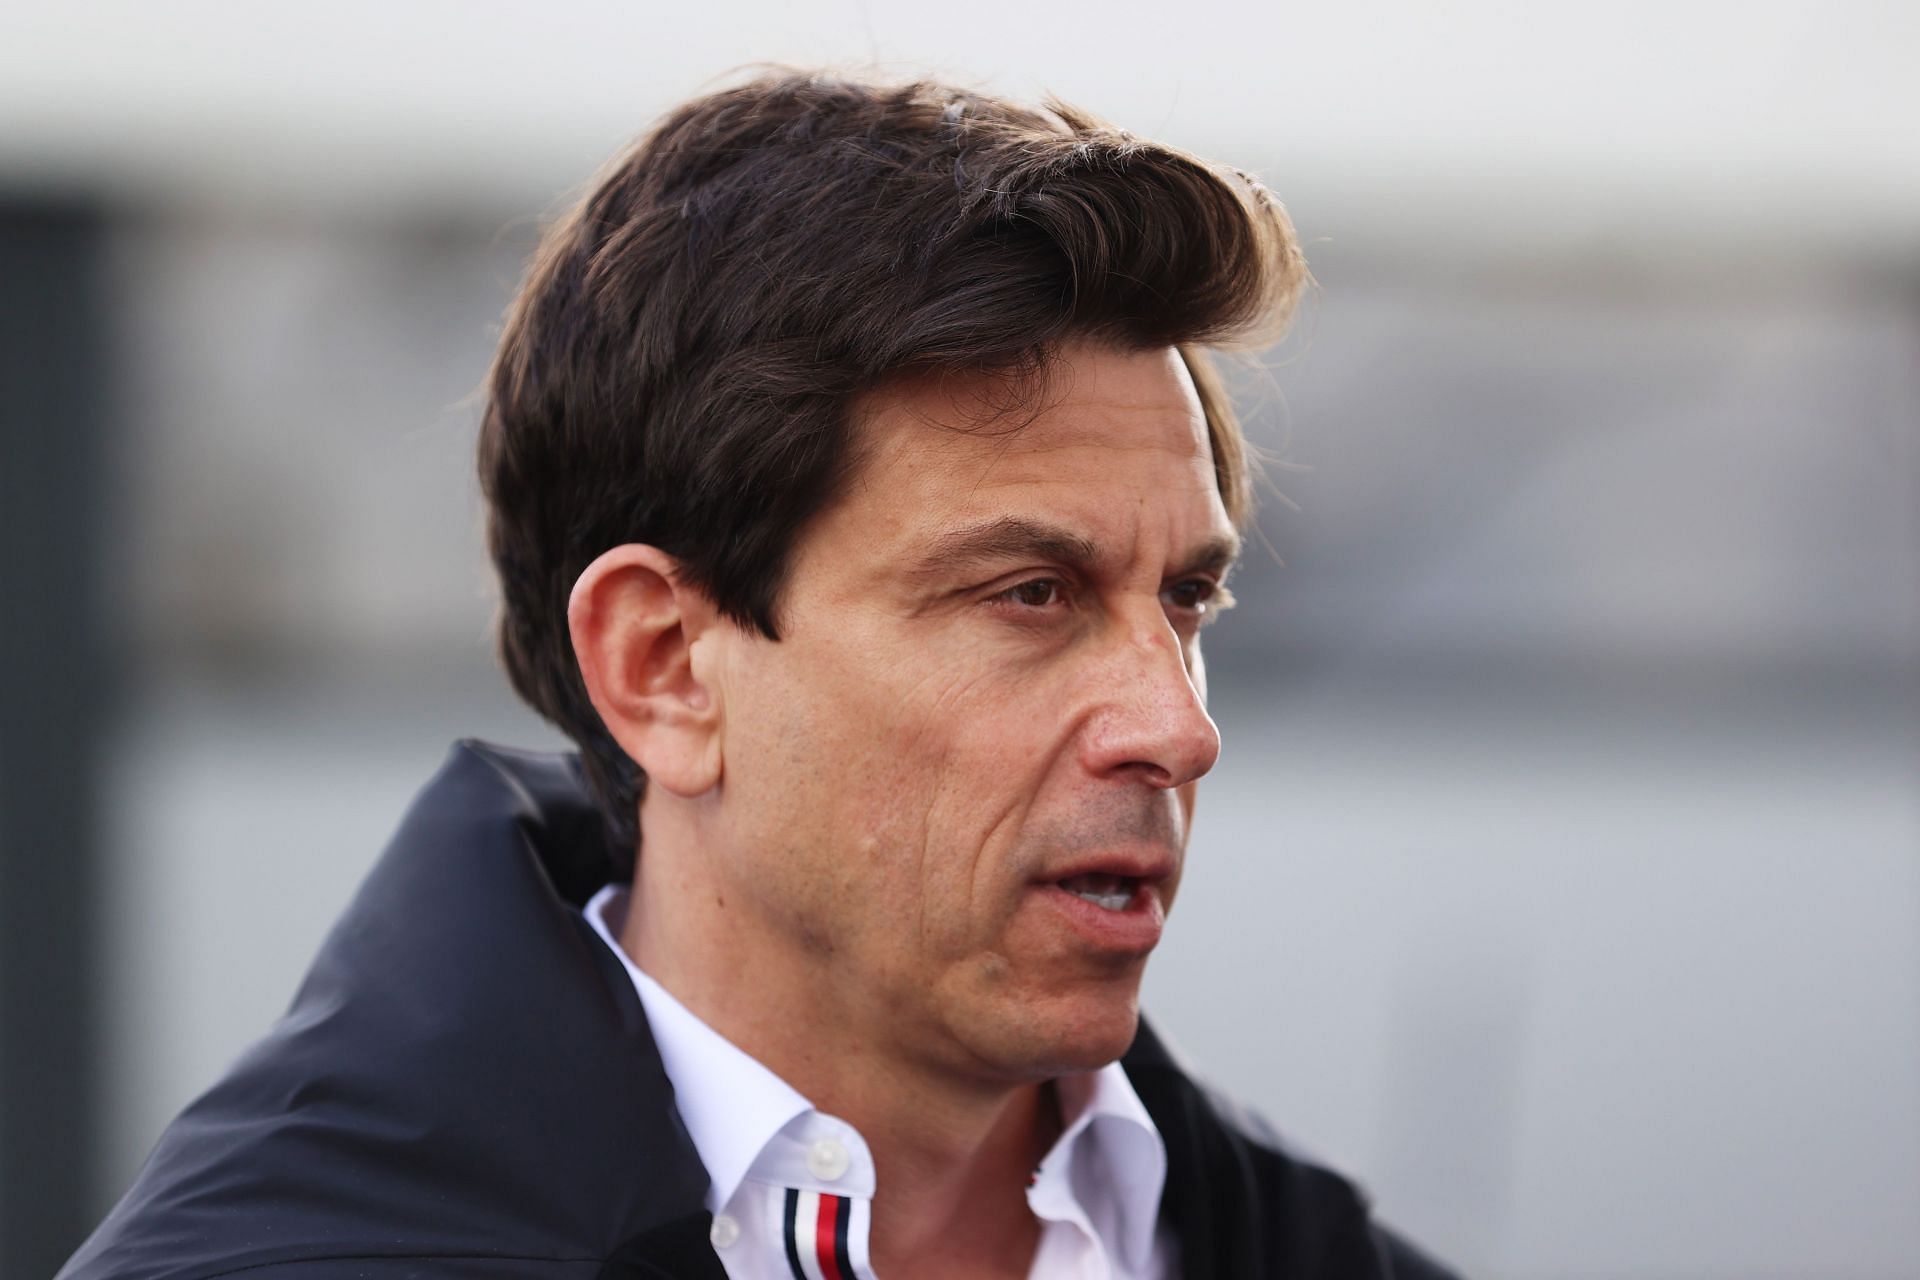 Mercedes boss Toto Wolff at the F1 Grand Prix of Australia - Final Practice